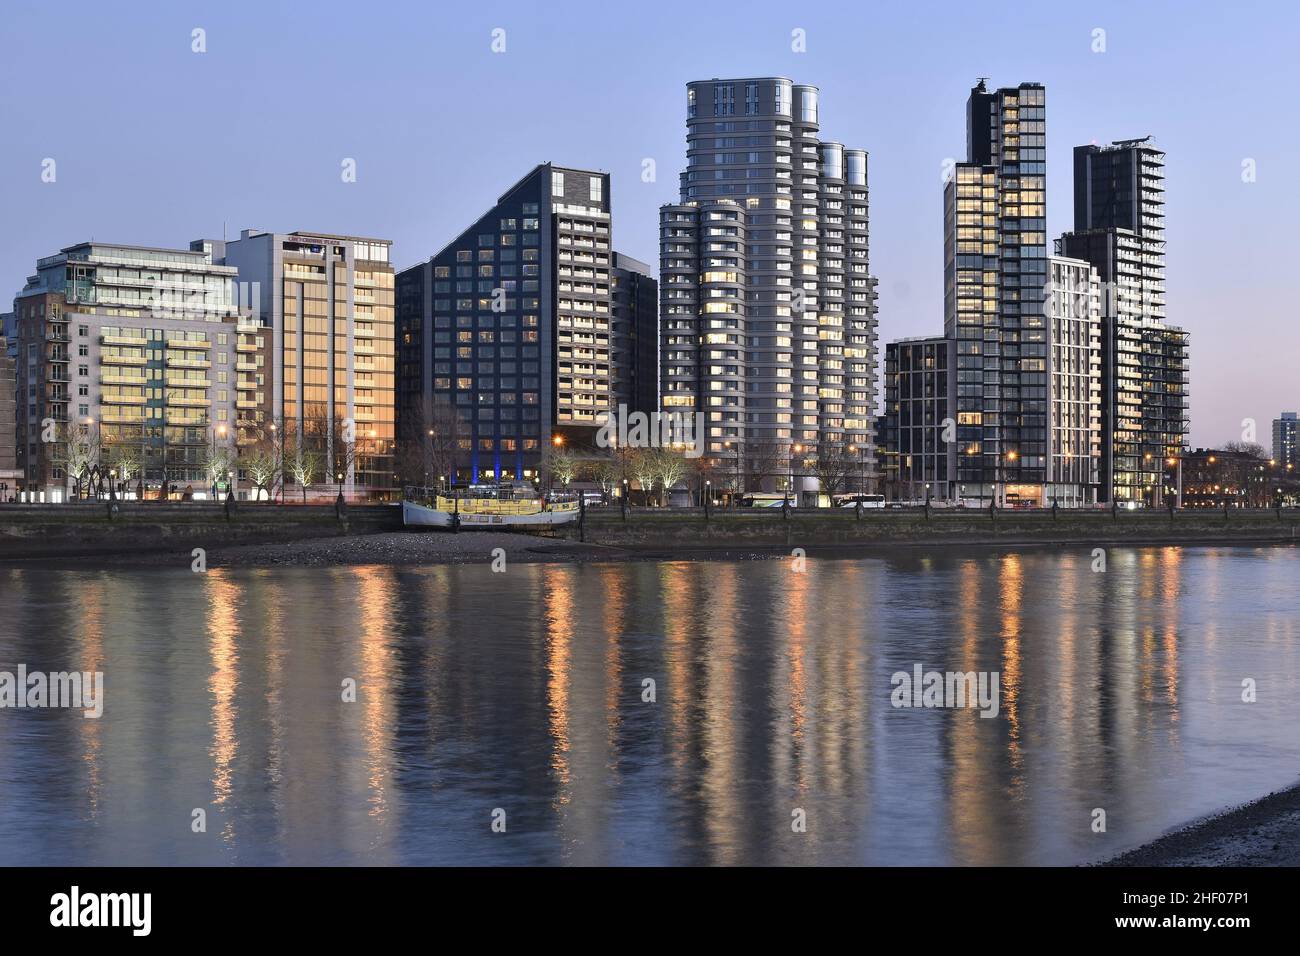 Corniche, Dumont and Merano - contemporary mixed-use developments reflecting in river Thames at dusk, Albert Embankment in London Borough of Lambeth. Stock Photo